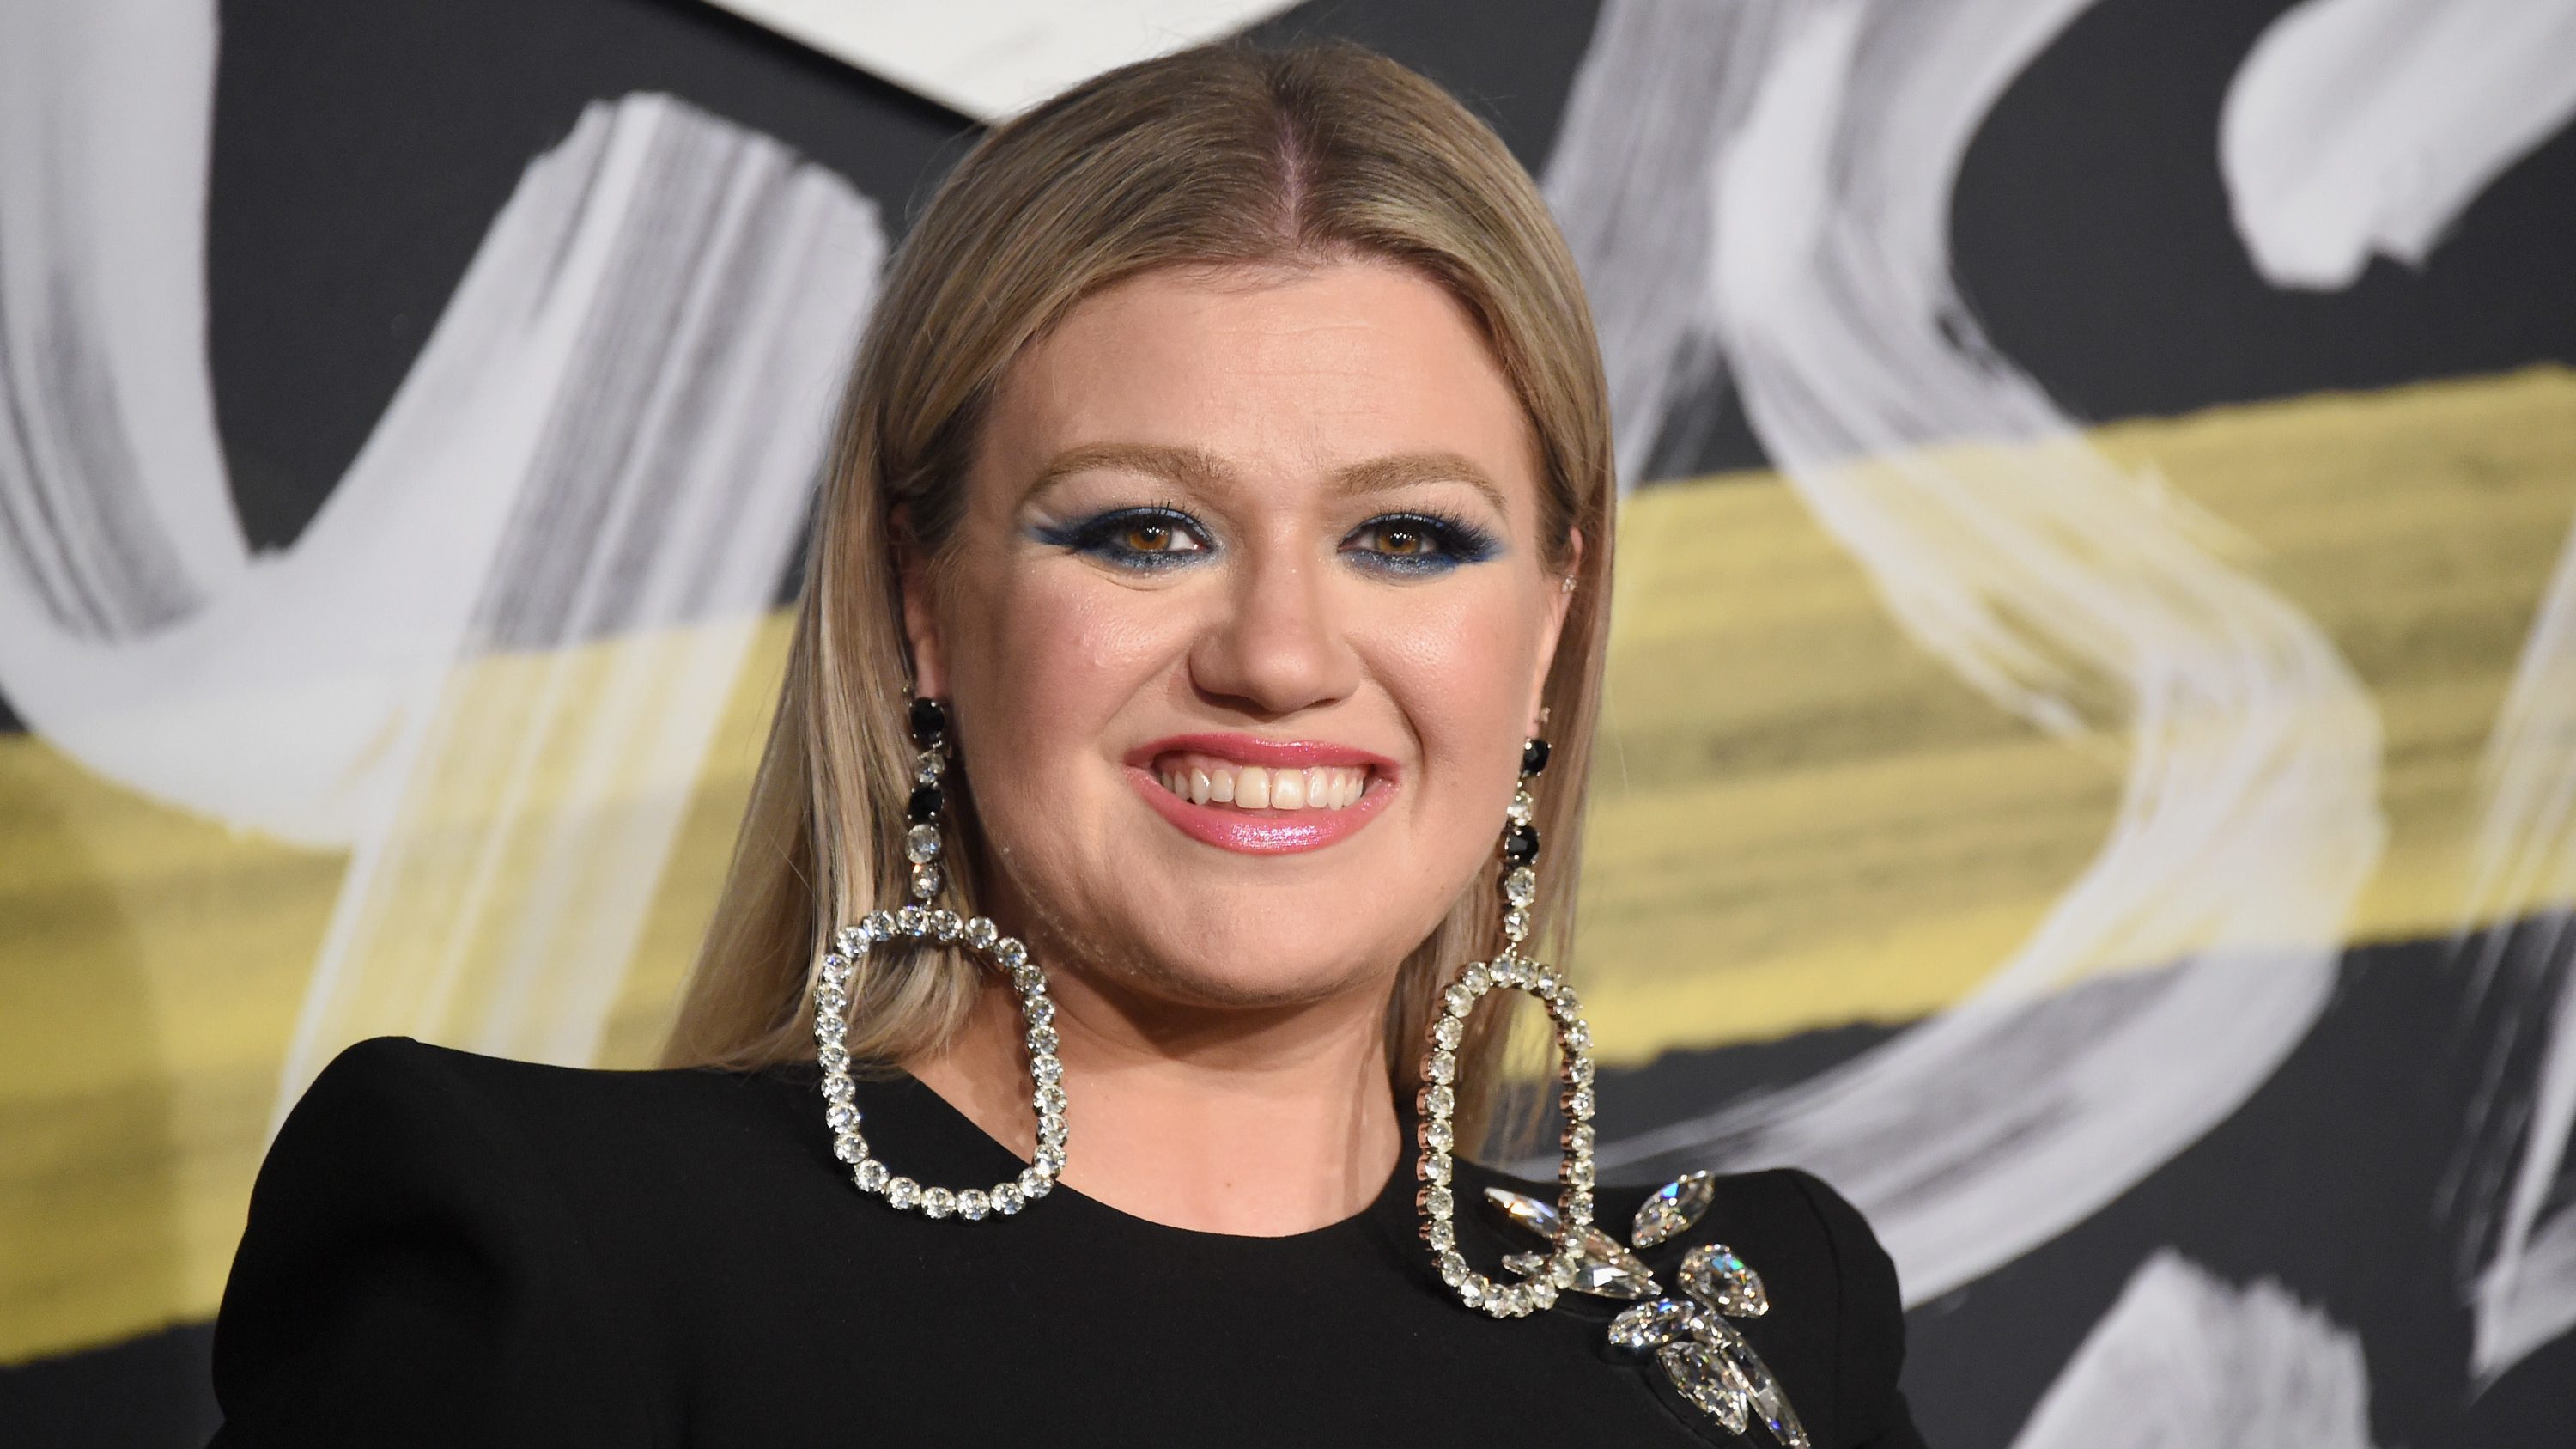 Kelly Clarkson Net Worth 2019 5 Fast Facts You Need to Know